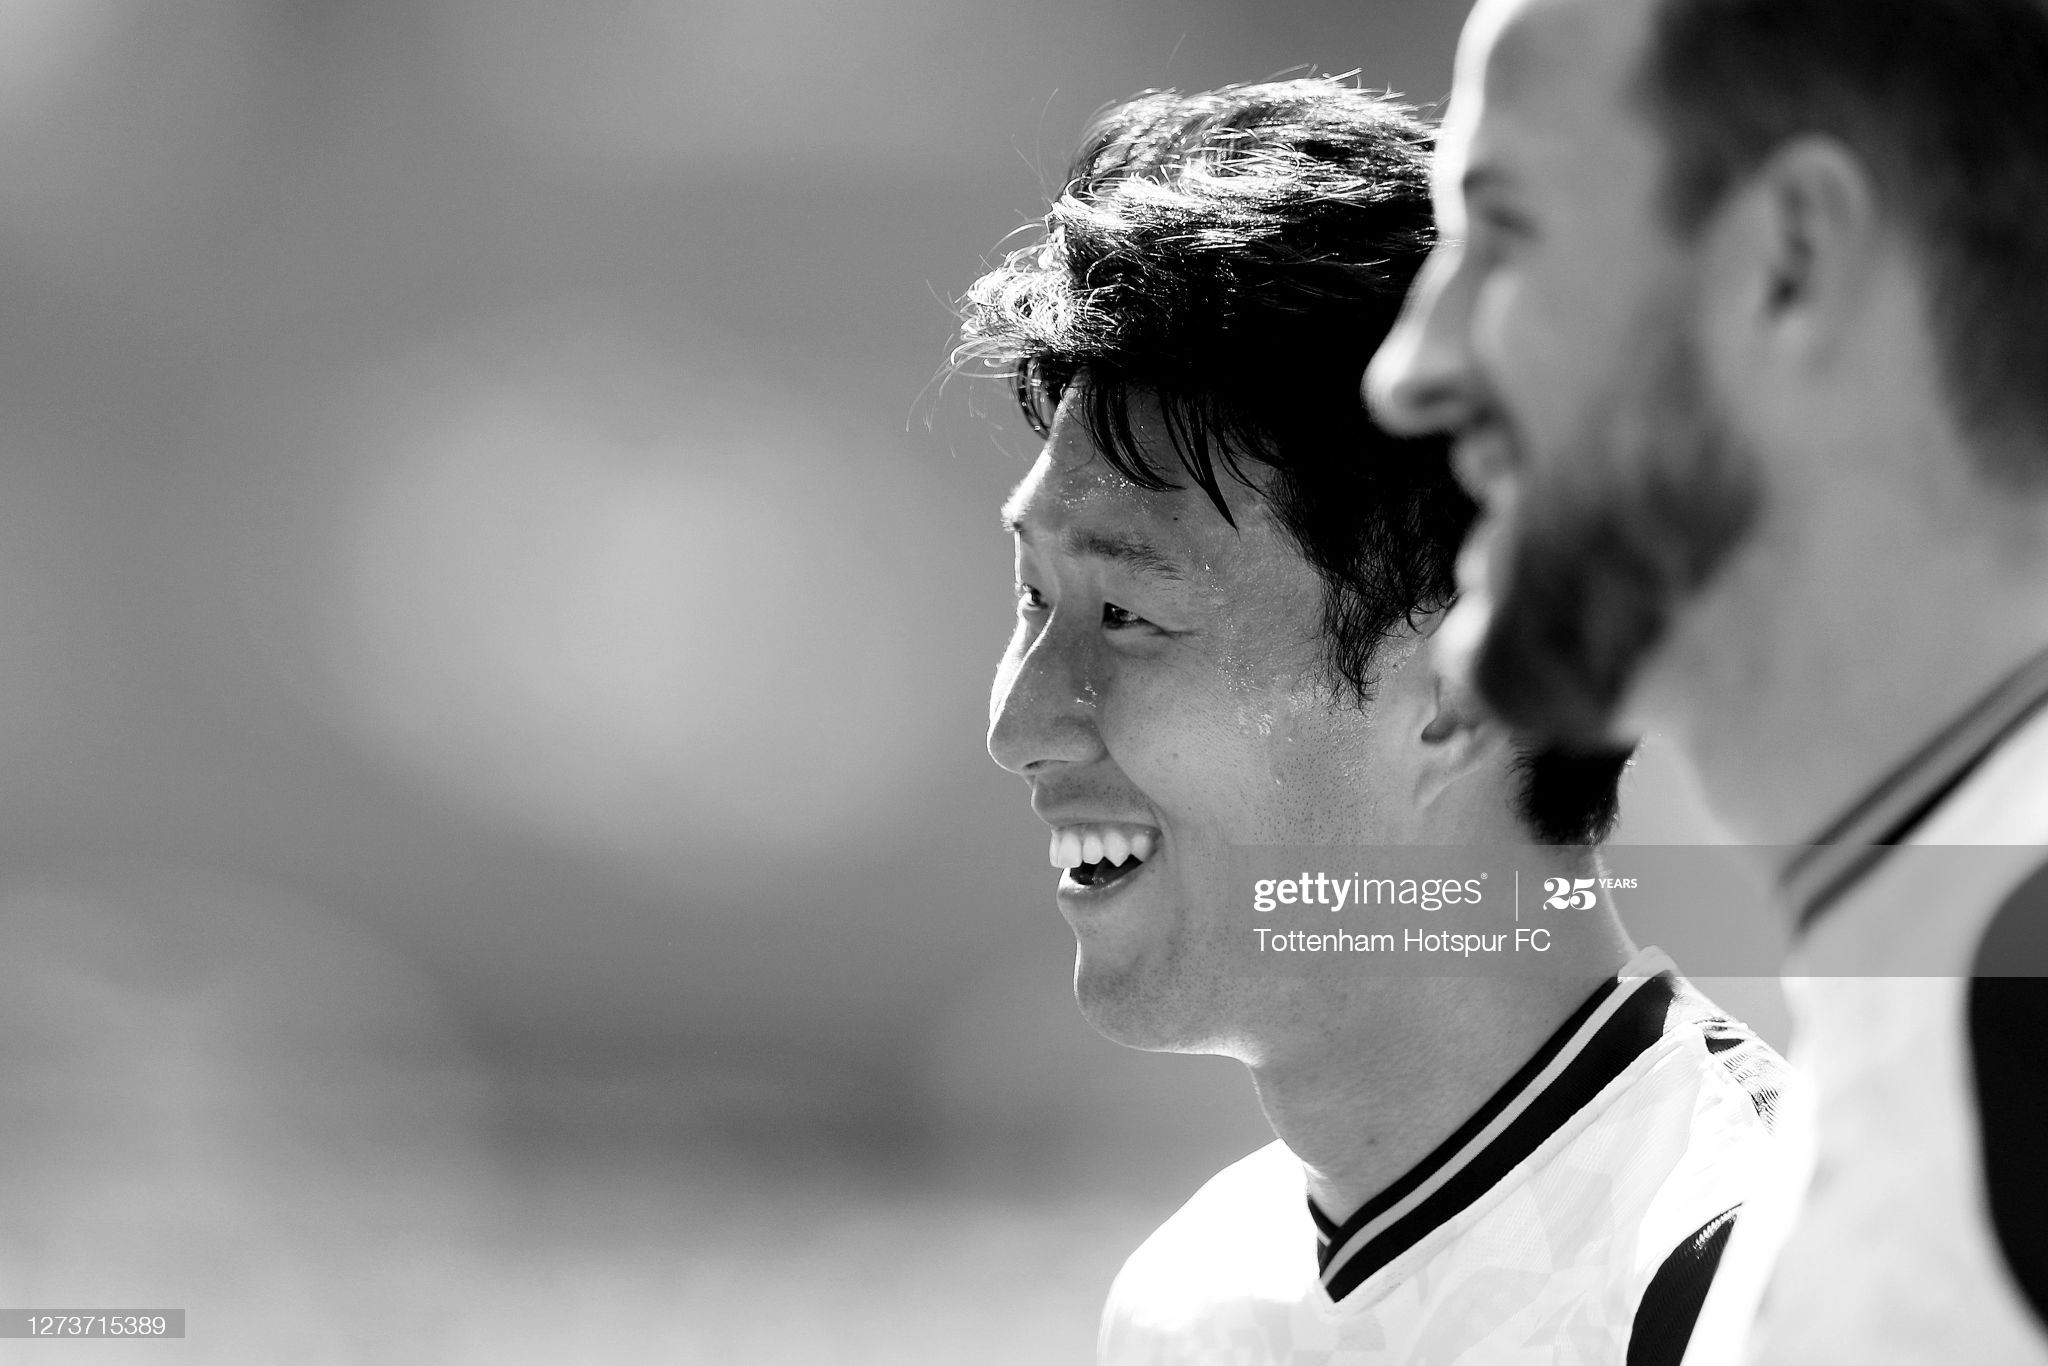 gettyimages-1273715389-2048x2048.jpg